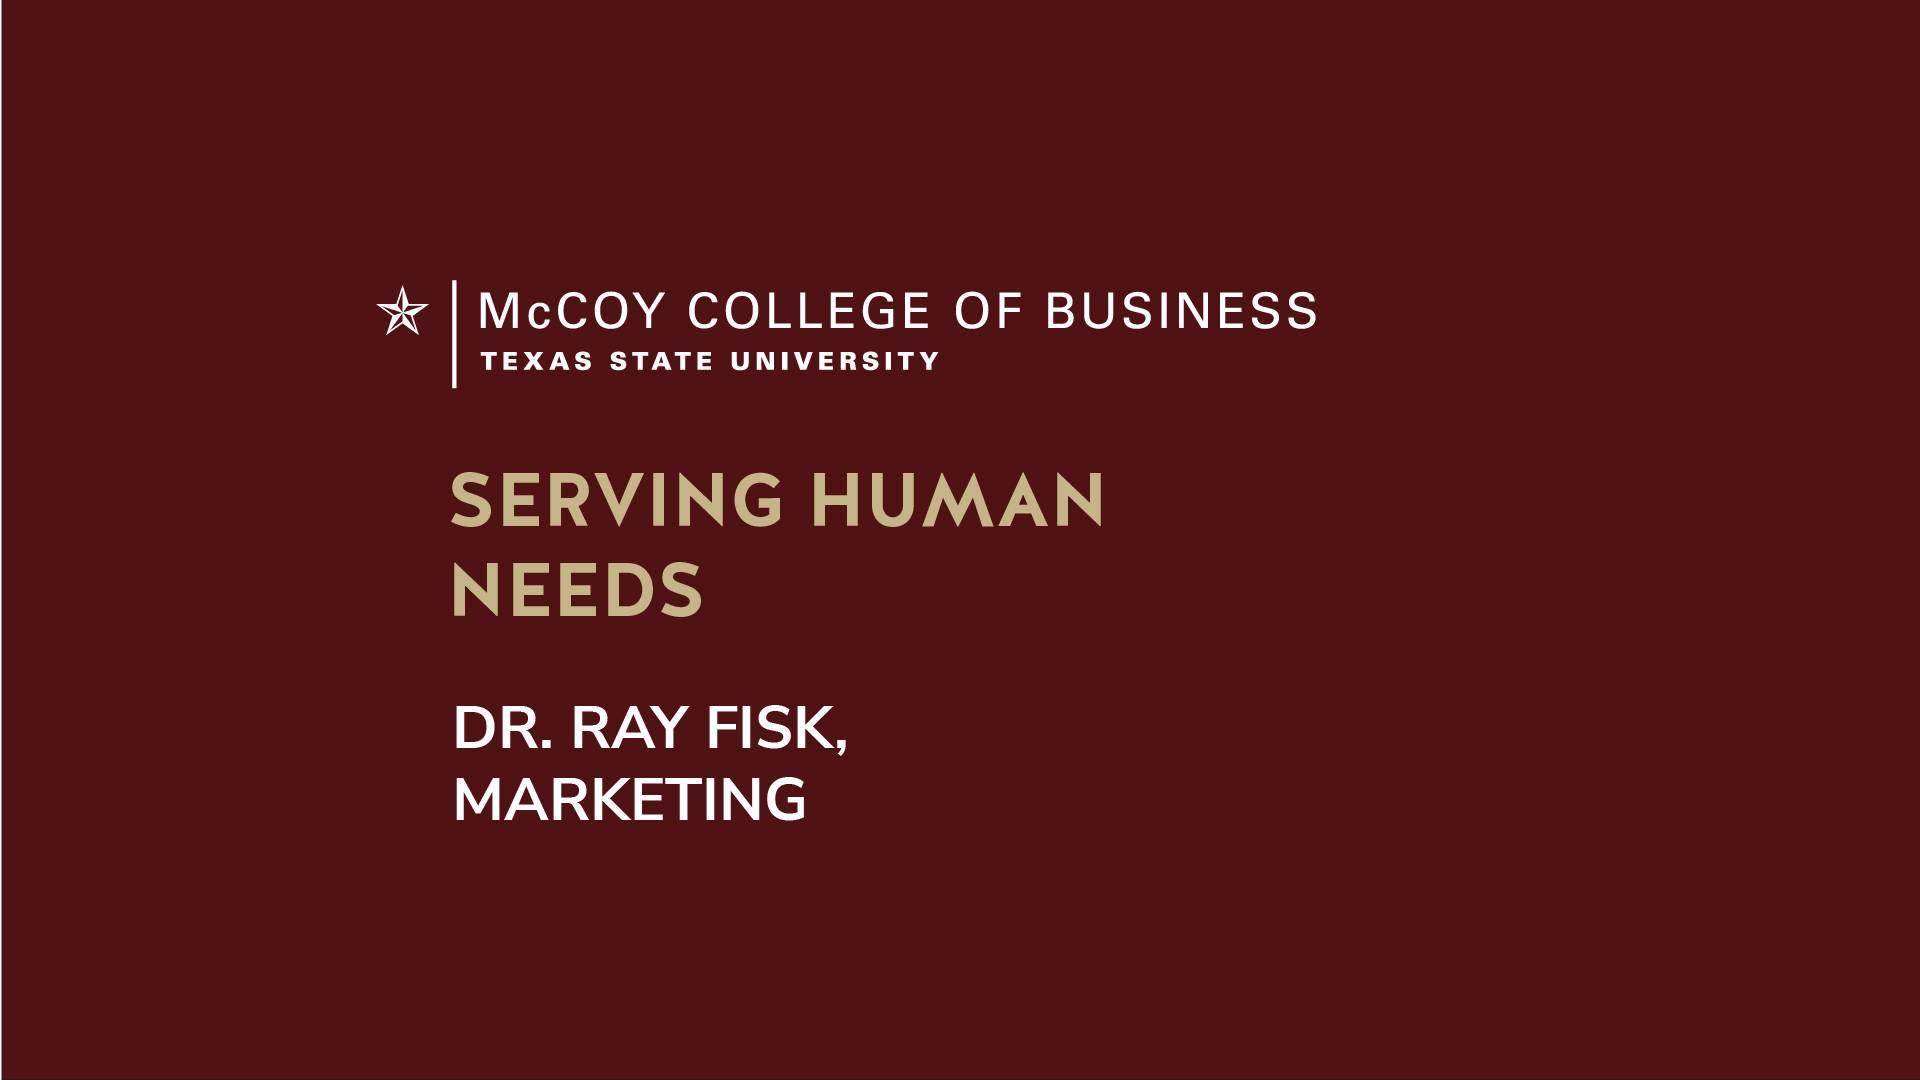 Dr. Ray Fisk discusses serving human needs through service marketing